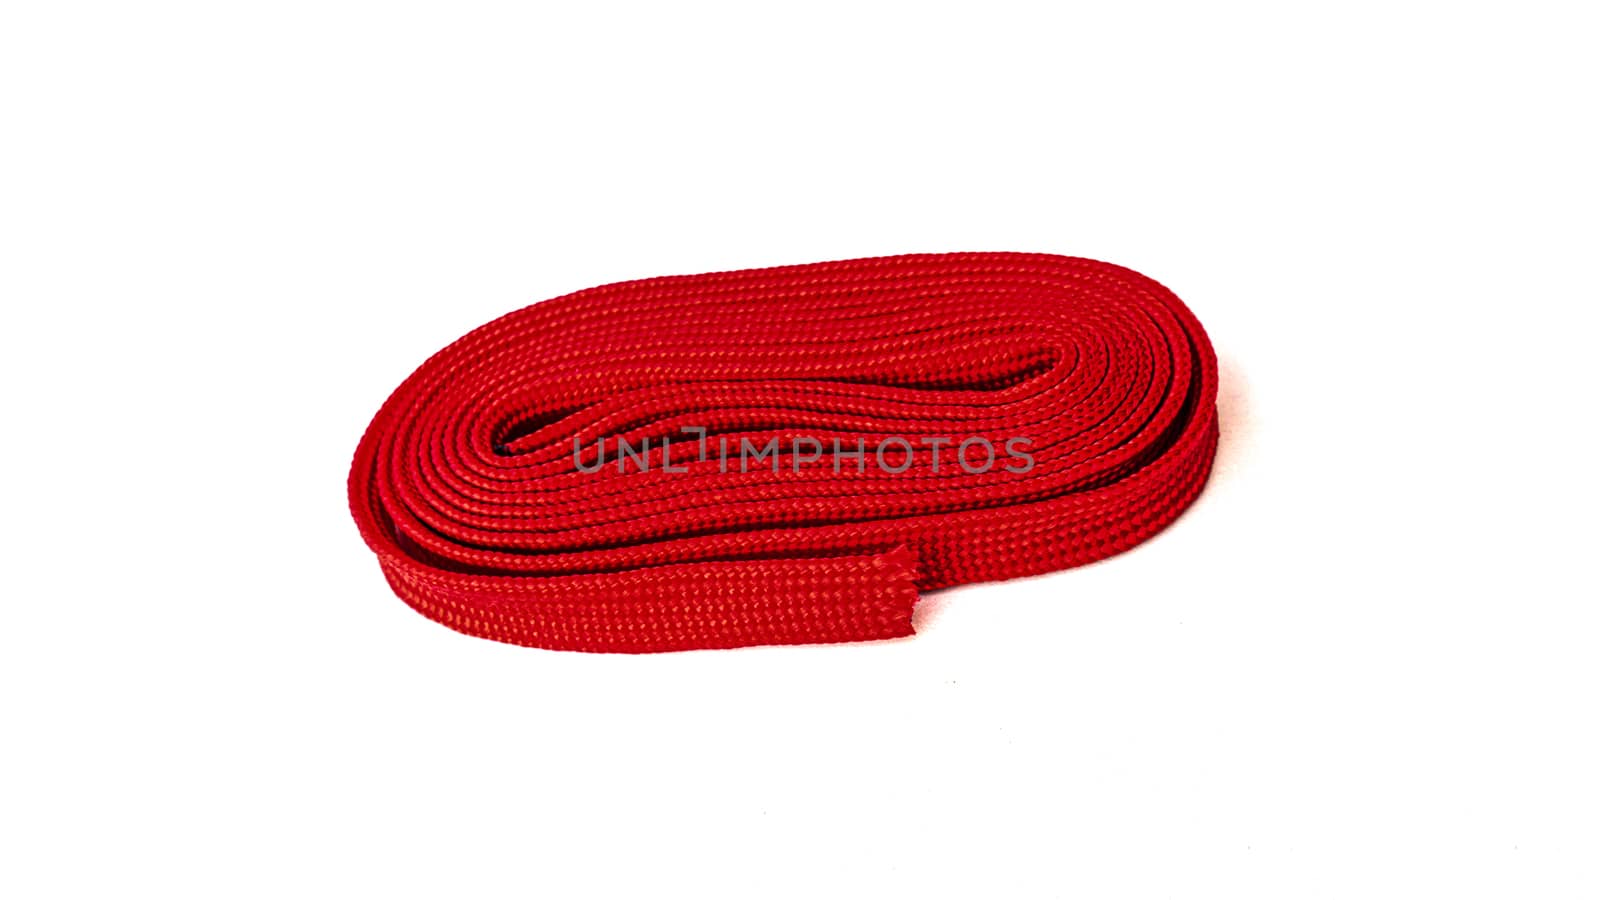 Red rope on white background. Fabric rope in red color folded in a coil.